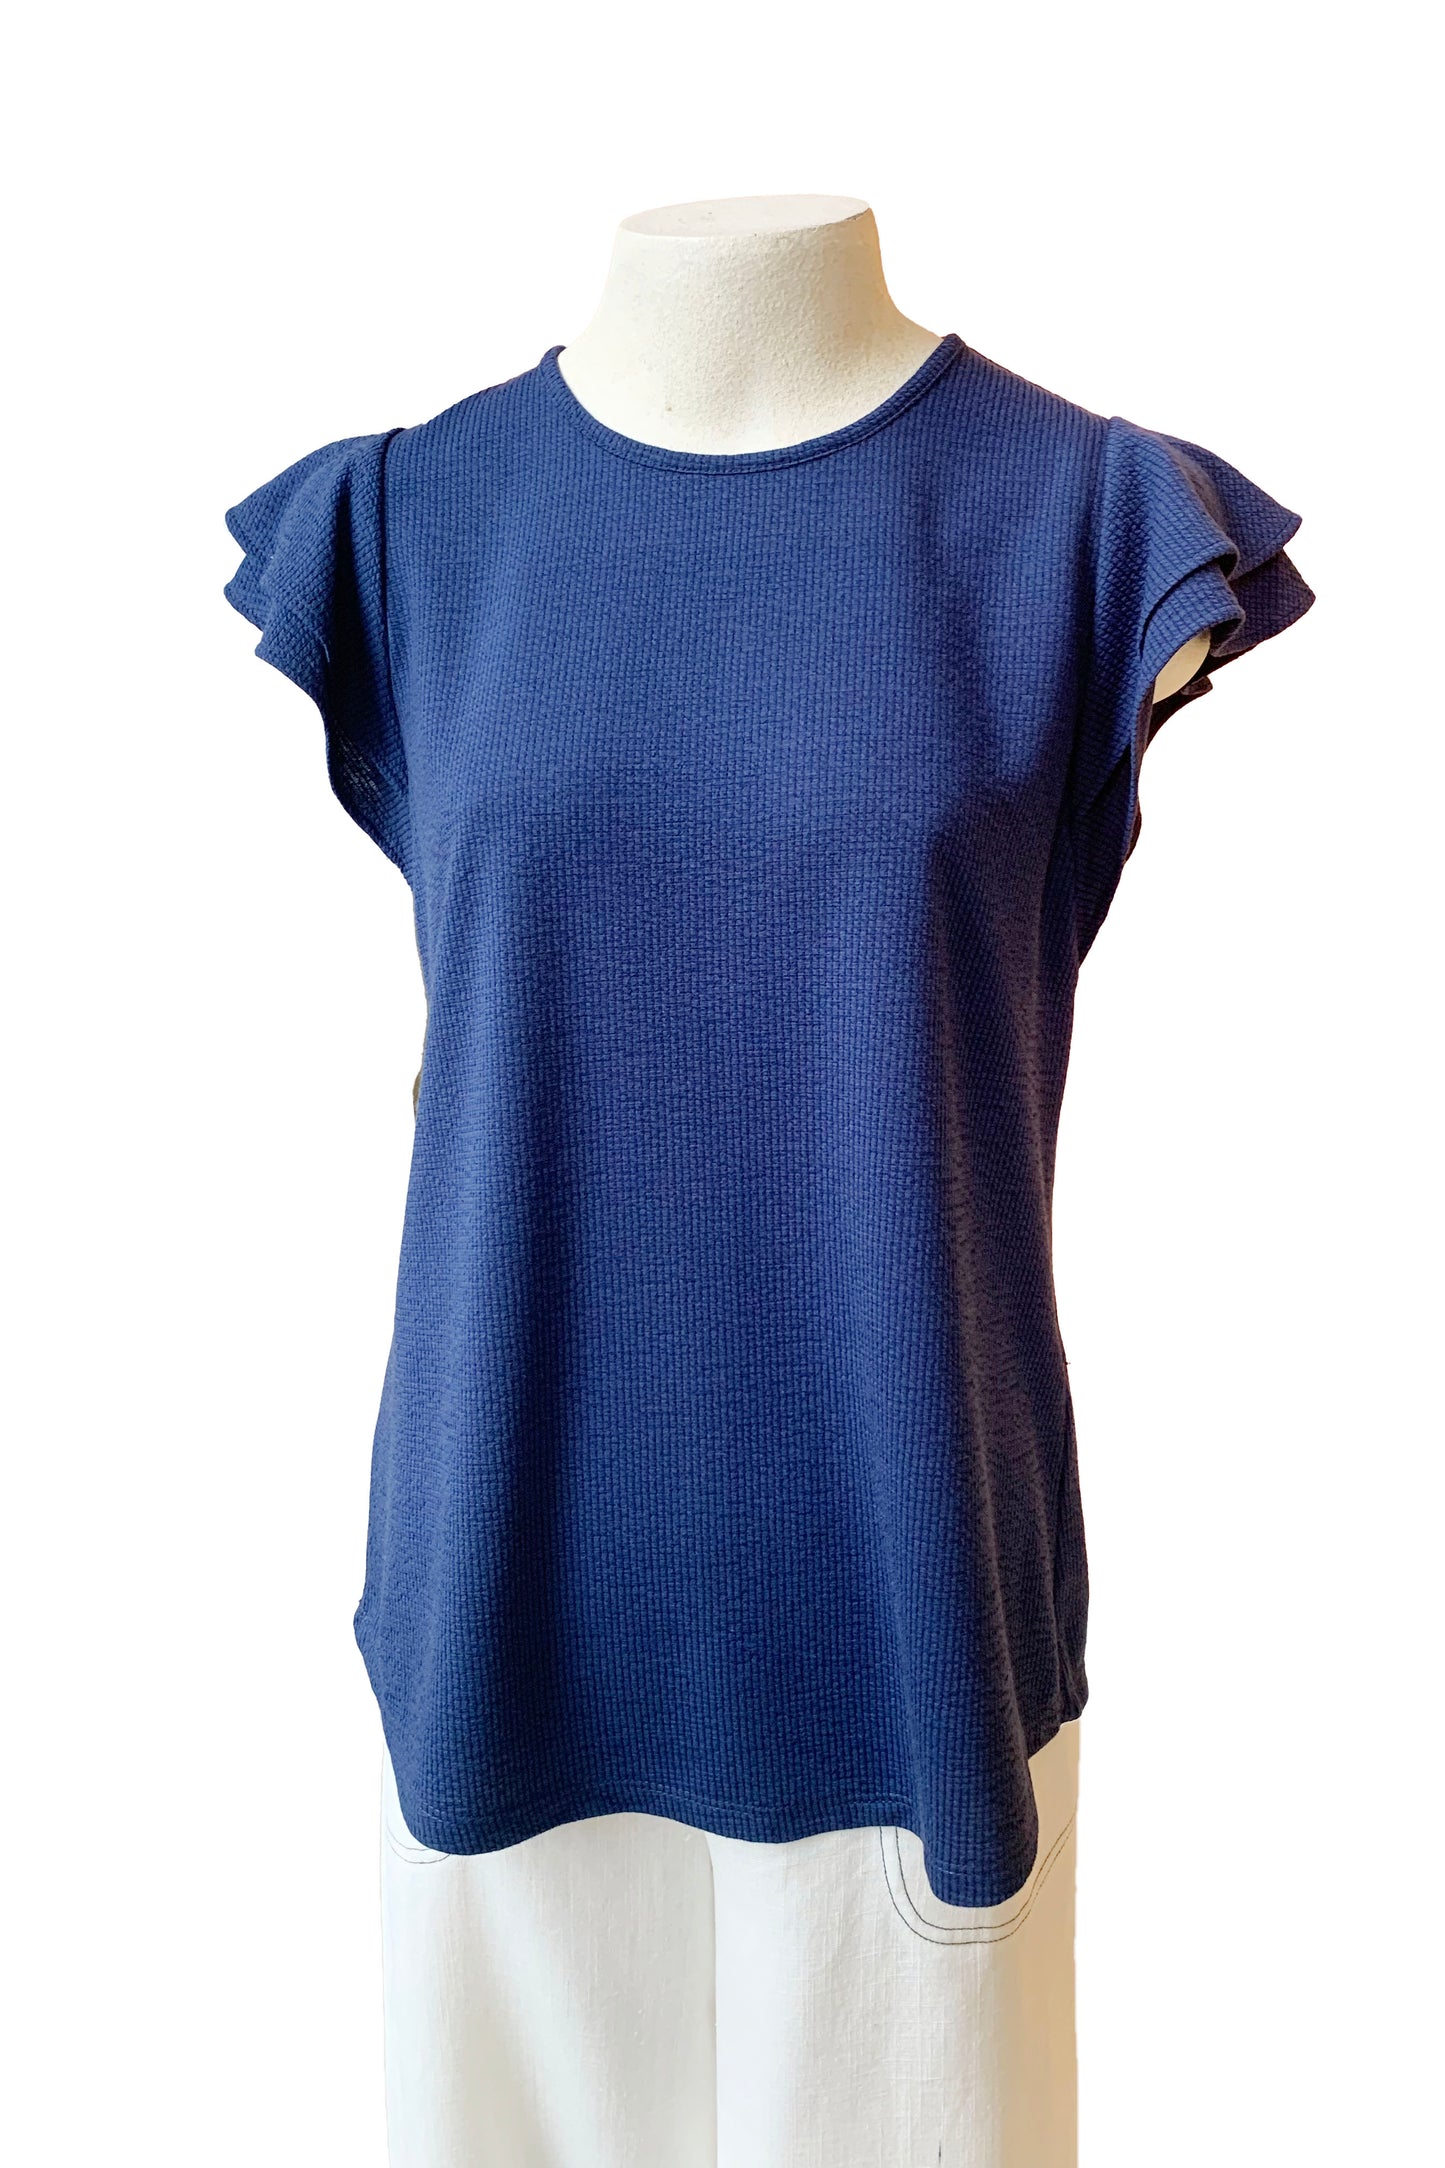 Casper Top by Pure Essence, Navy, ruffles at shoulders, short sleeves, round neck, slightly fitted shape, sizes XS to XXL, made in Canada